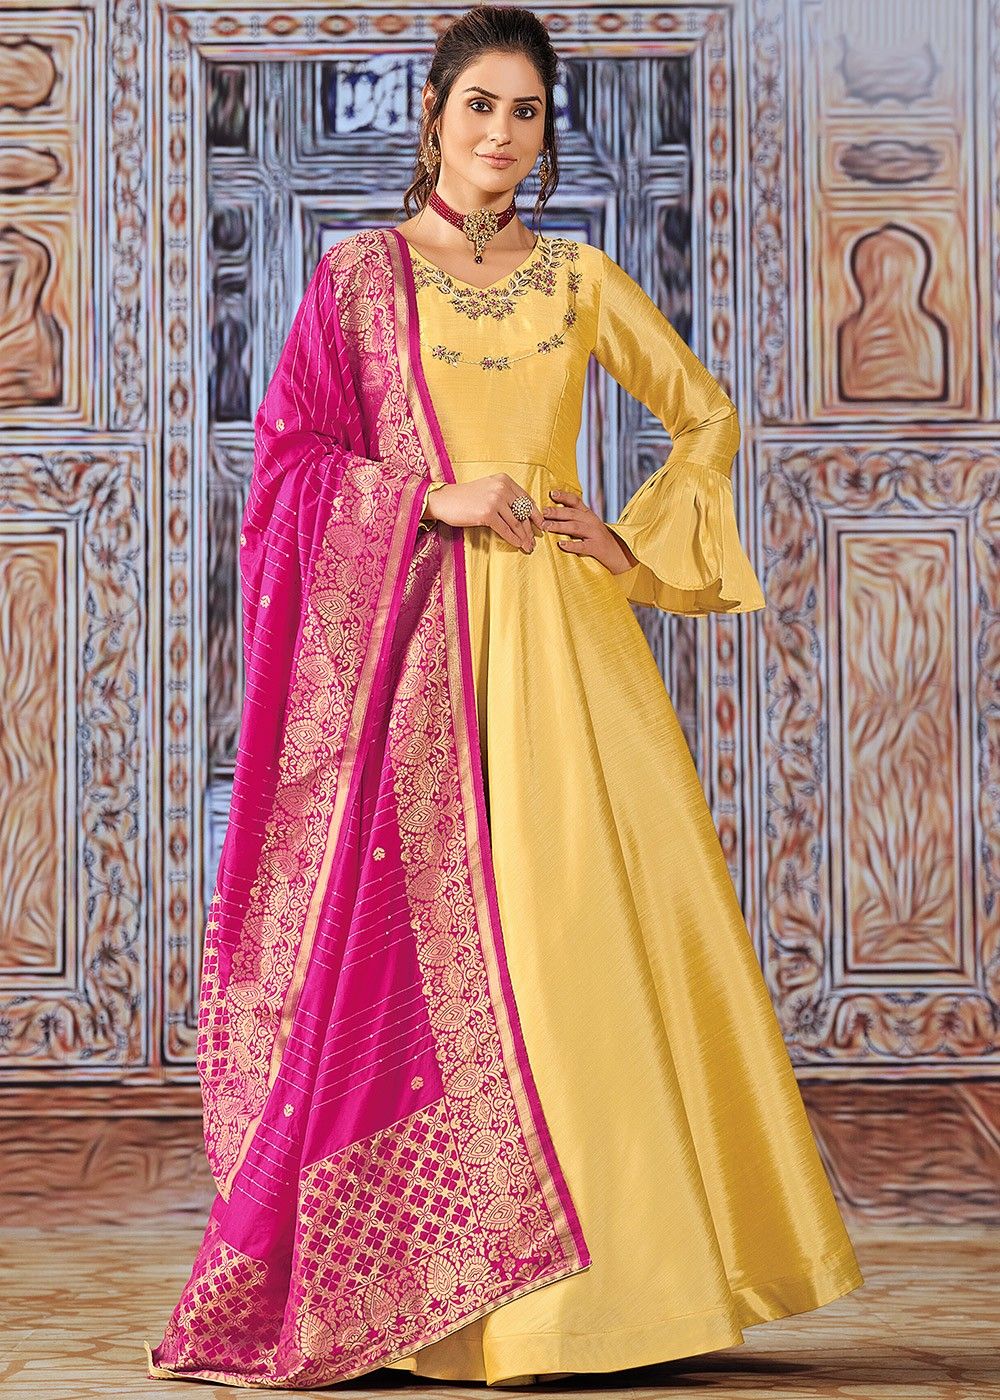 Details more than 204 yellow pink suit super hot